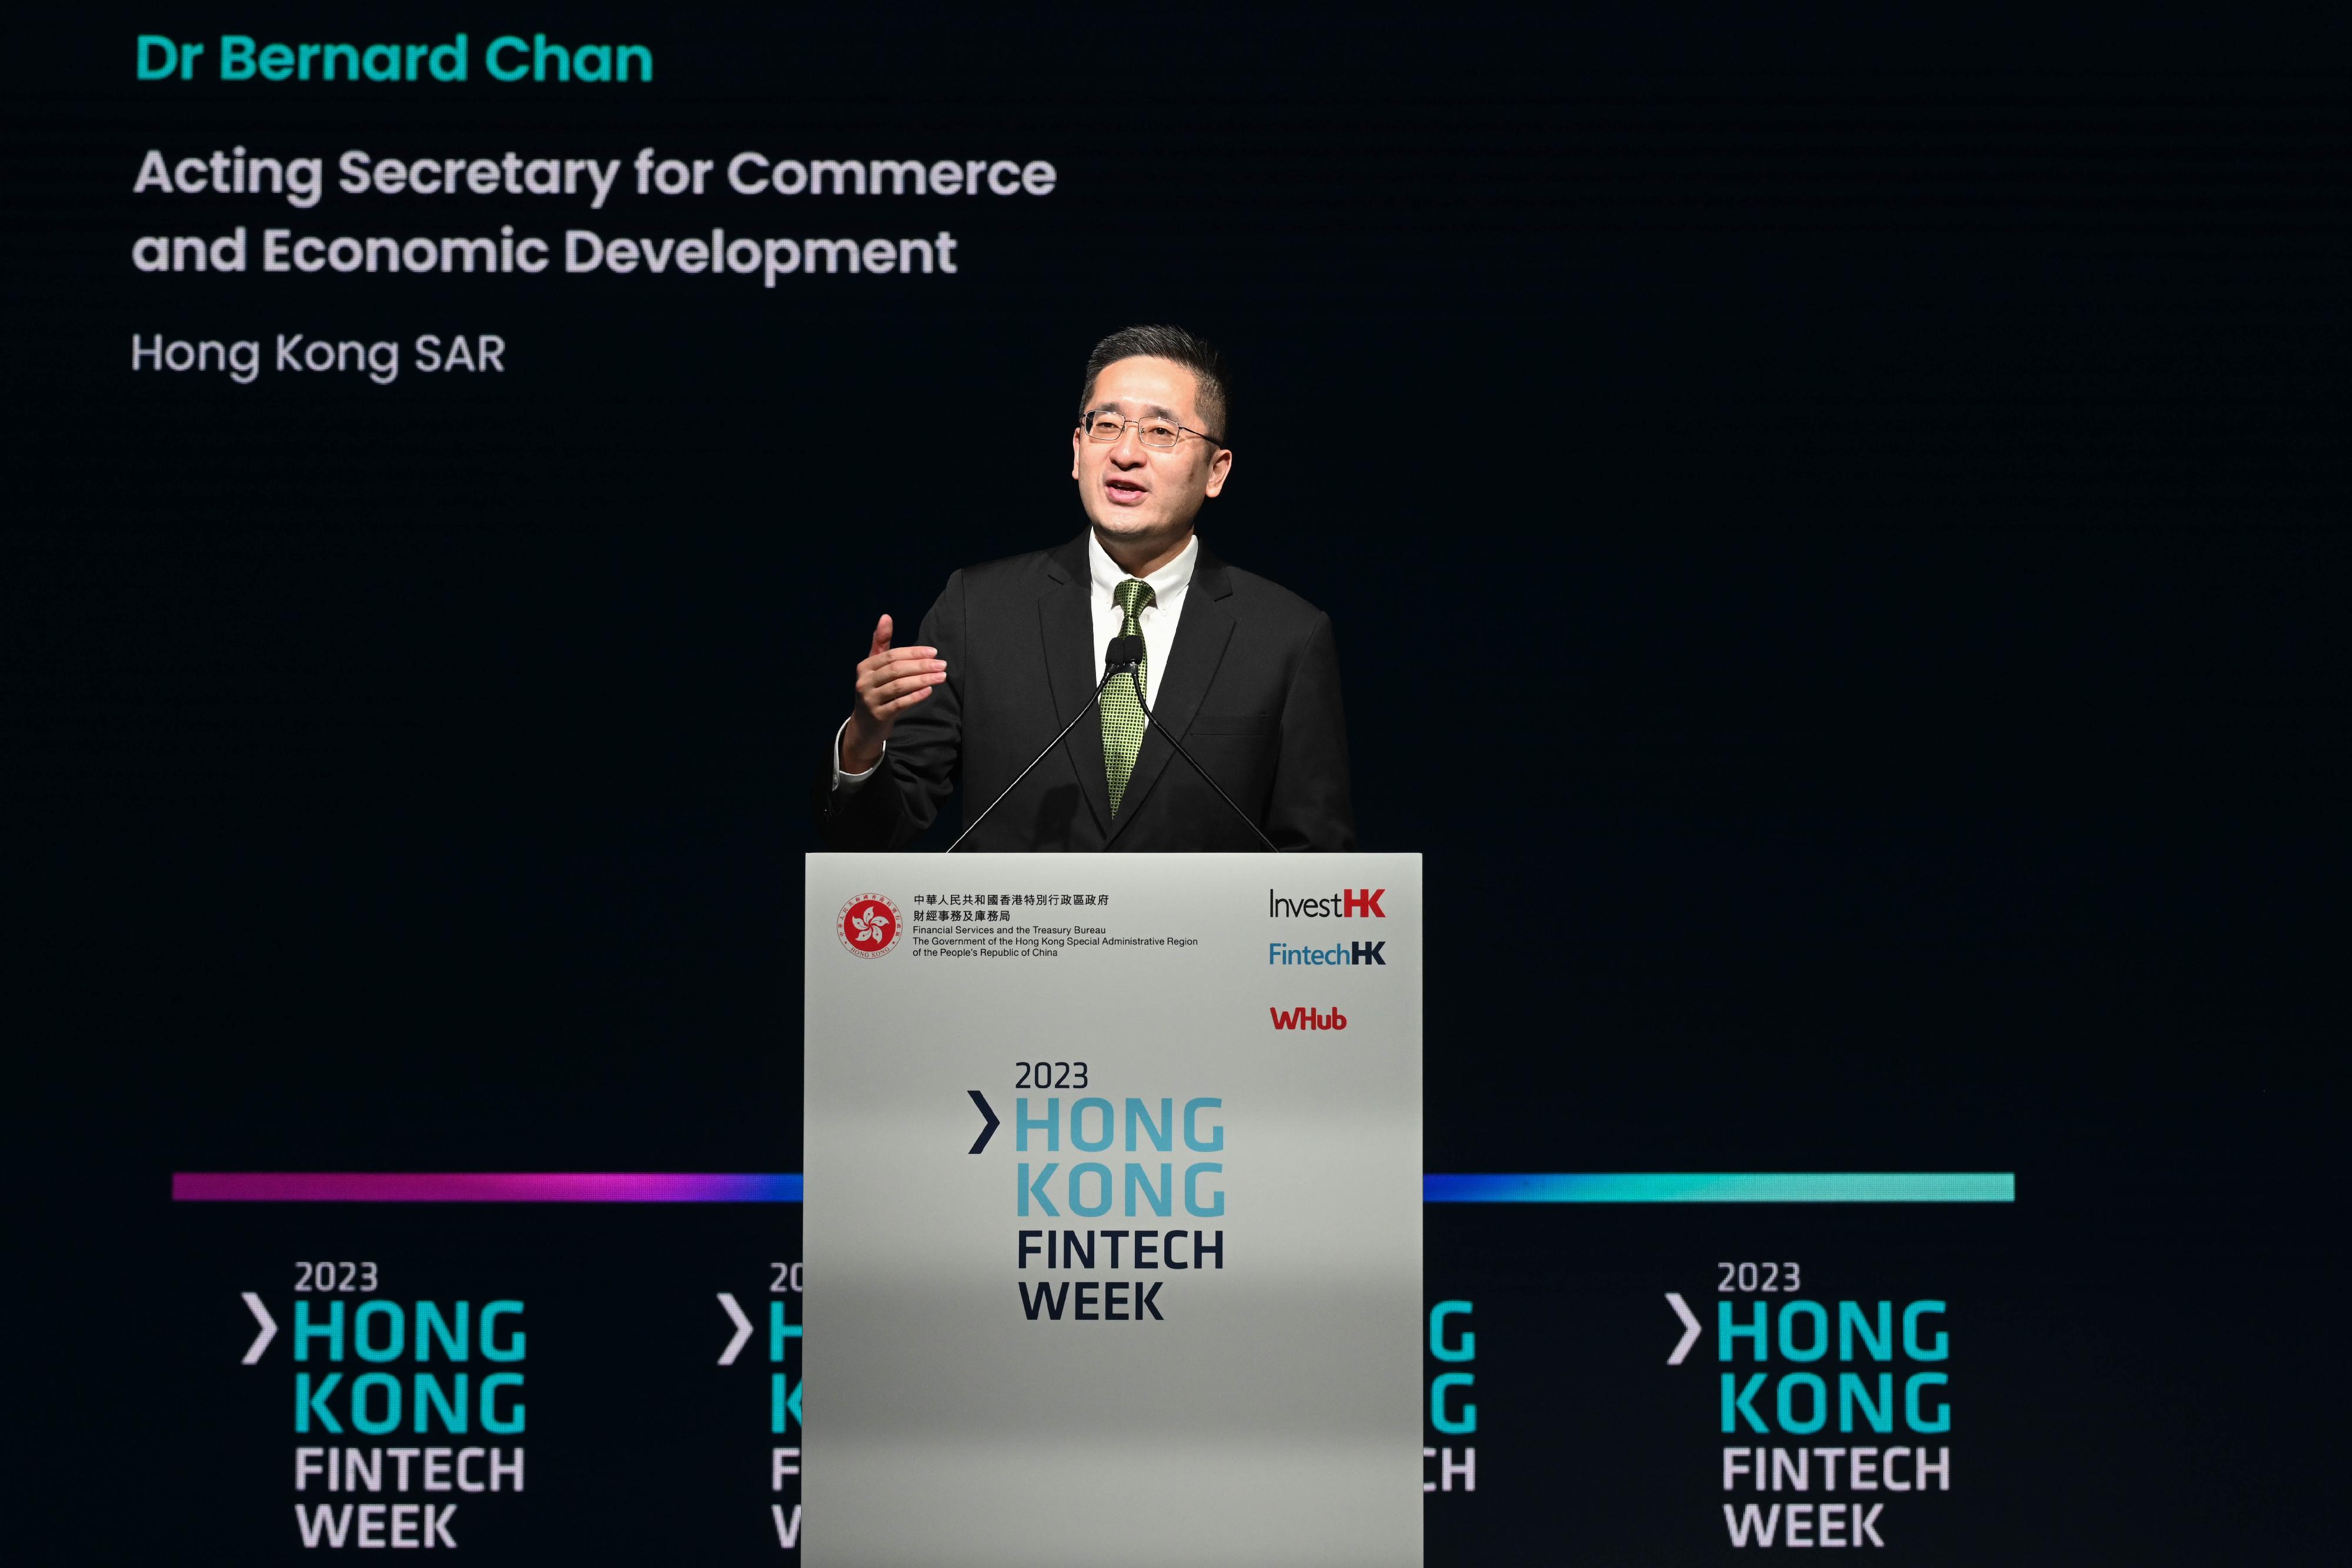 Hong Kong FinTech Week 2023 concluded on November 5, capping off a week-long feast of fintech that included the Greater Bay Area Day on October 31 and the two-day main conference on November 2 and 3. Photo shows the Acting Secretary for Commerce and Economic Development, Dr Bernard Chan, speaking at the Hong Kong FinTech Week 2023 on November 3.